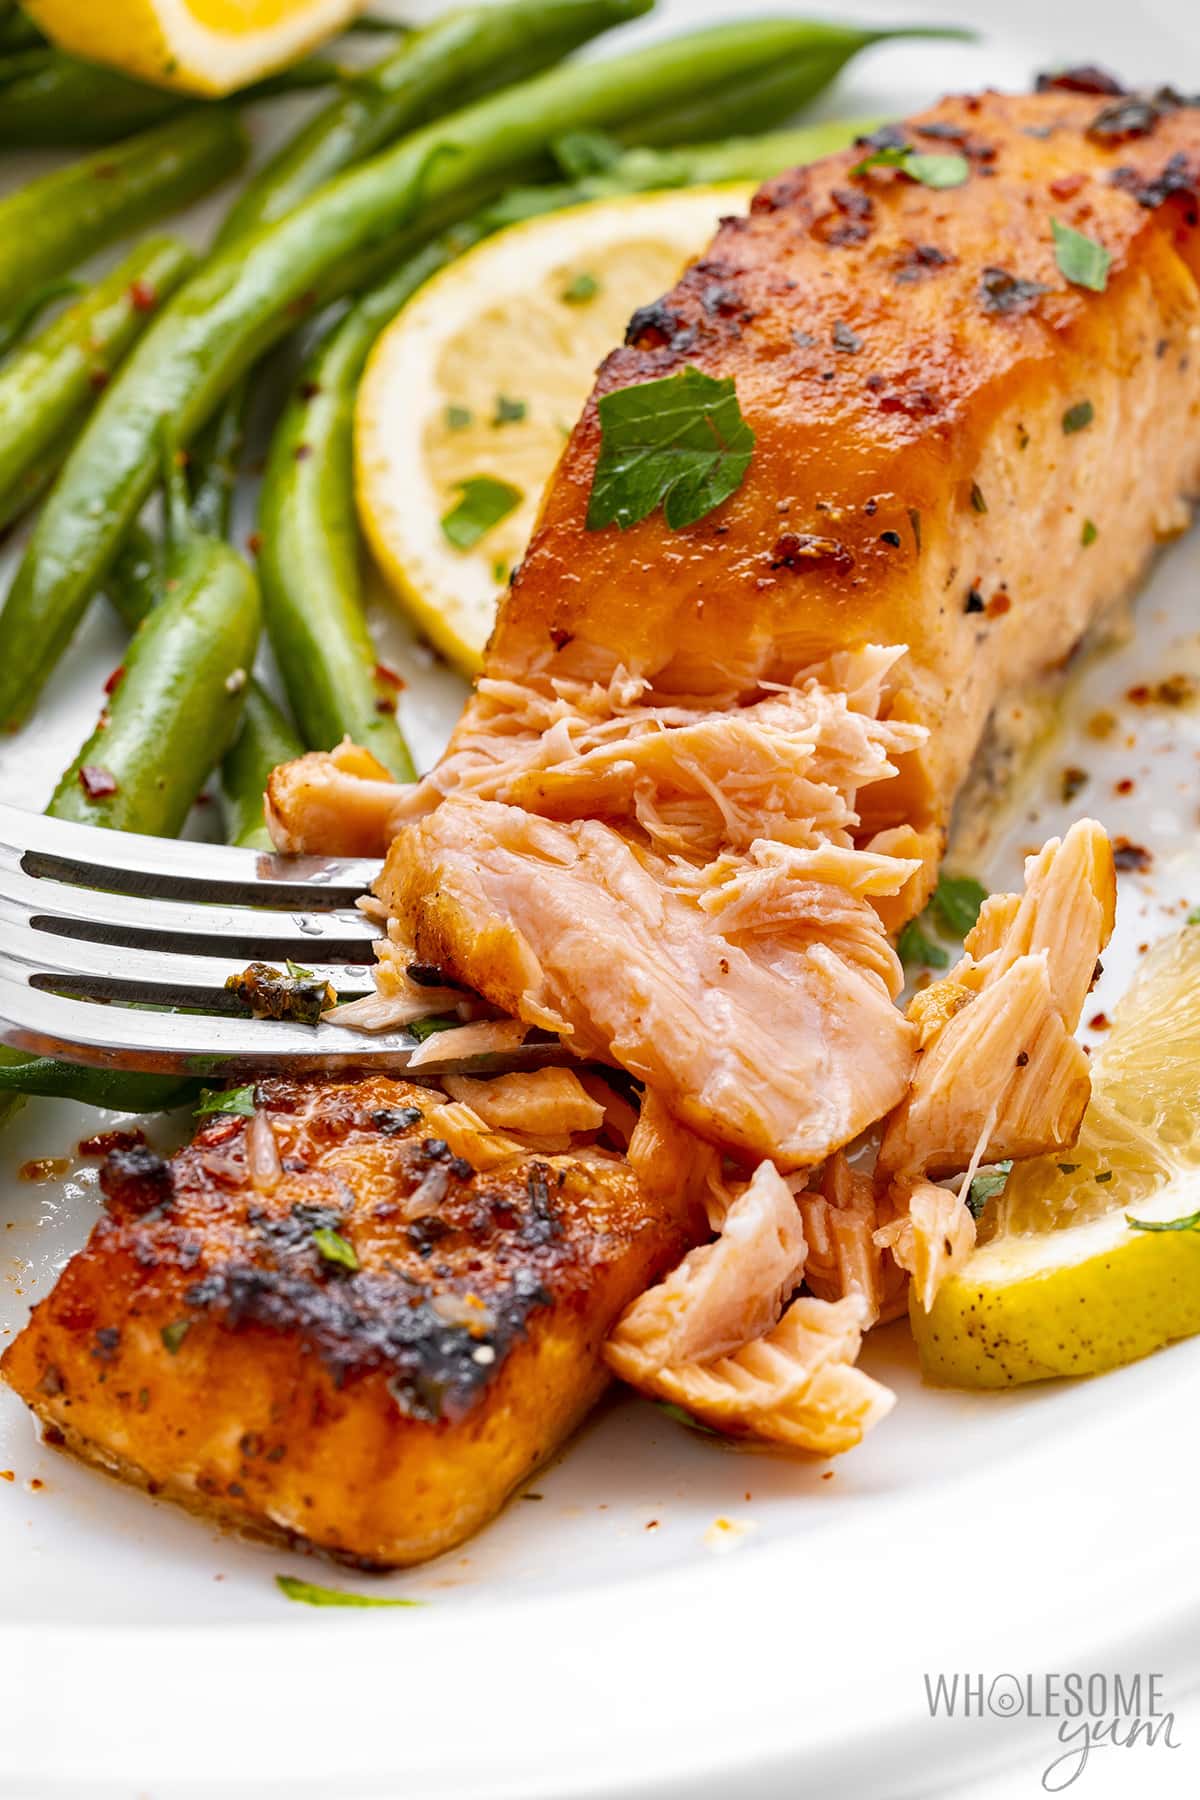 Broiled salmon flaked with a fork.